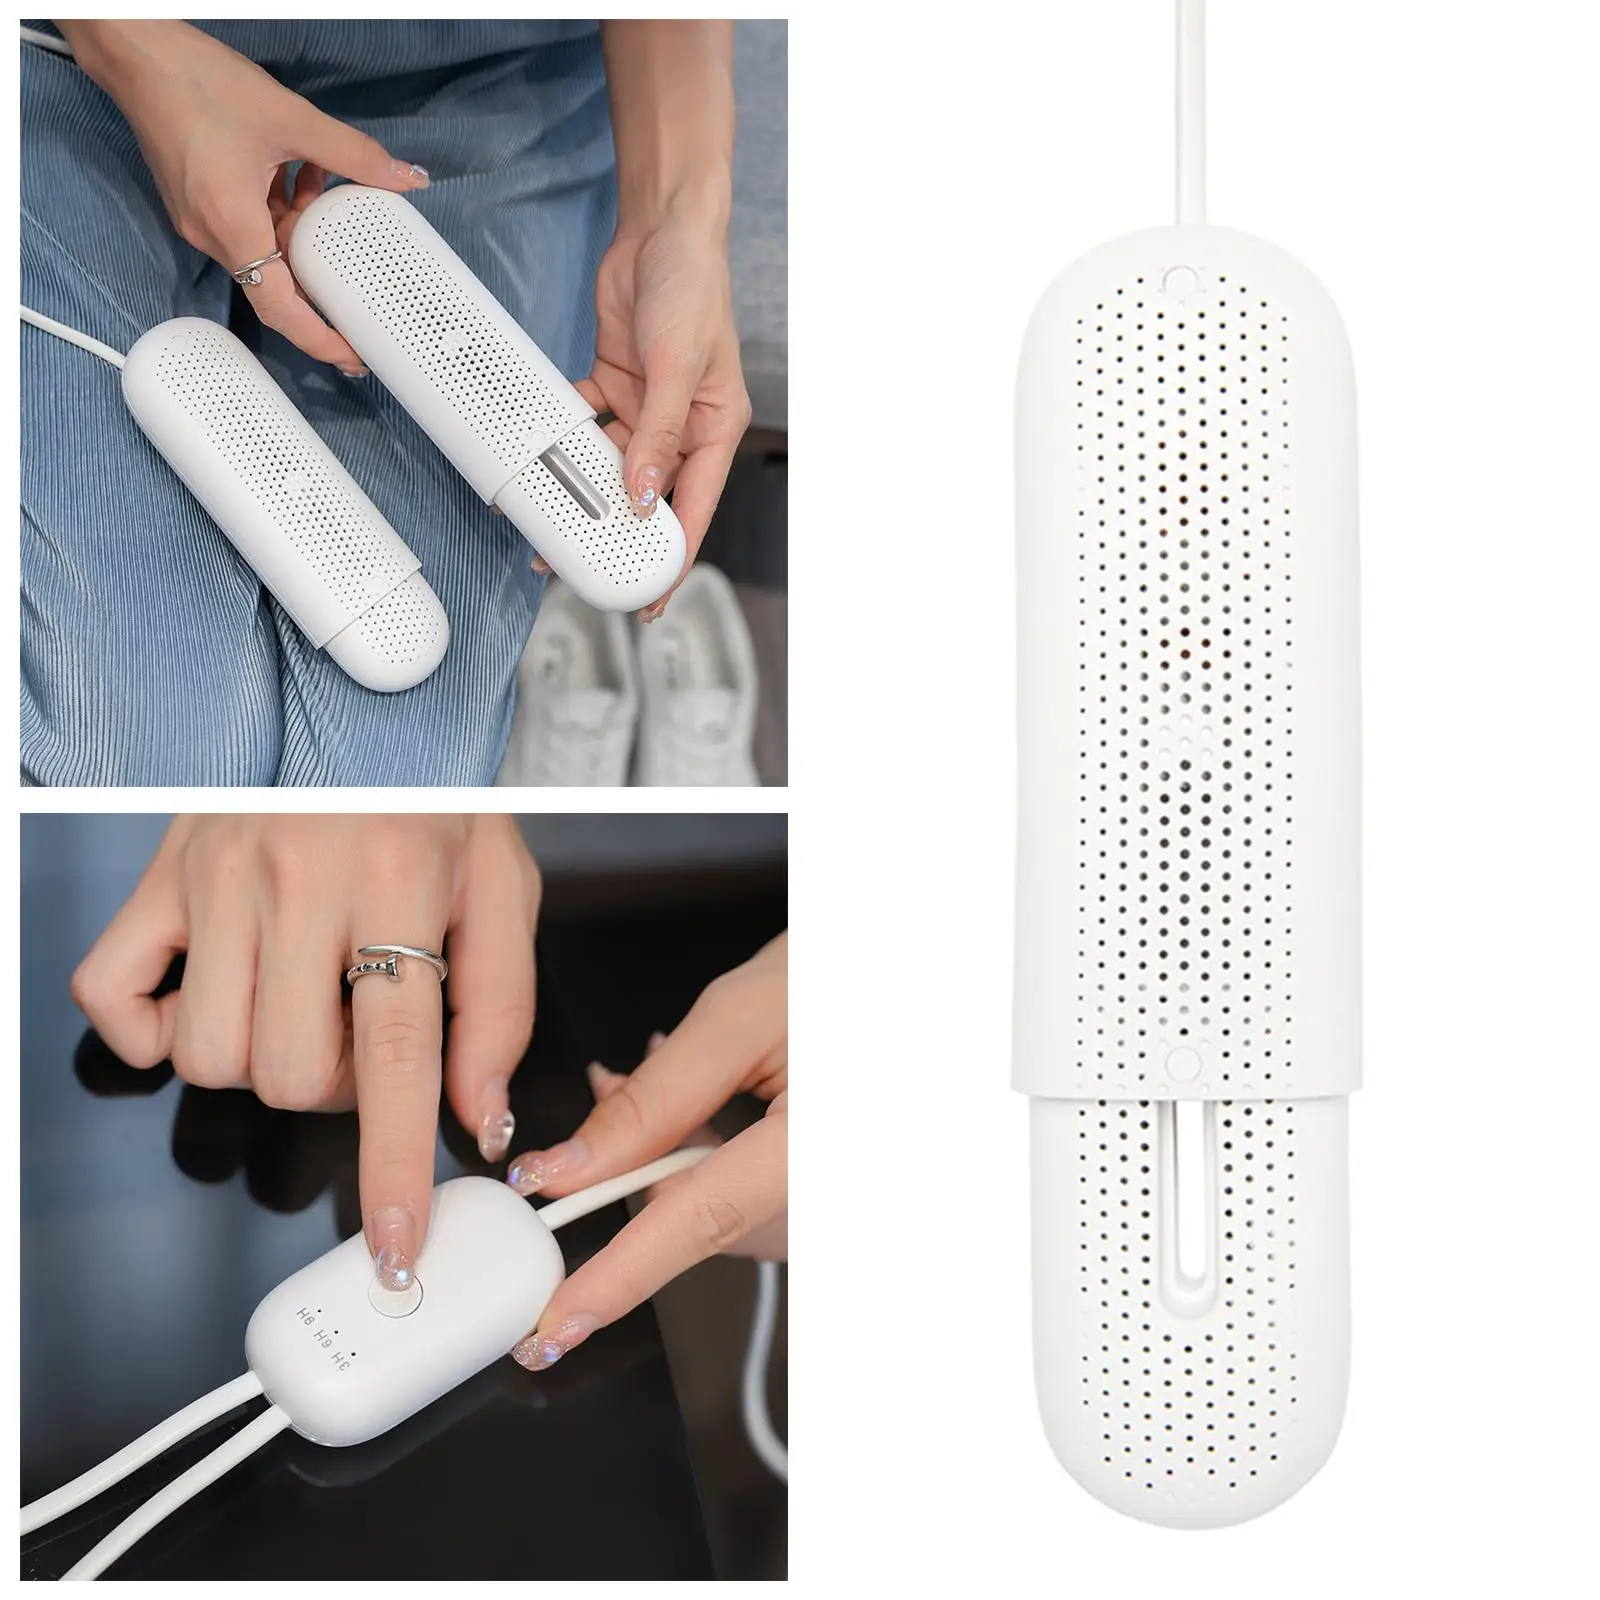 Portable Shoe Dryer Warmer with Quick Drying Eliminates Moisture and Odor Heater Footwear Dryers for Winter Rainy Seasons